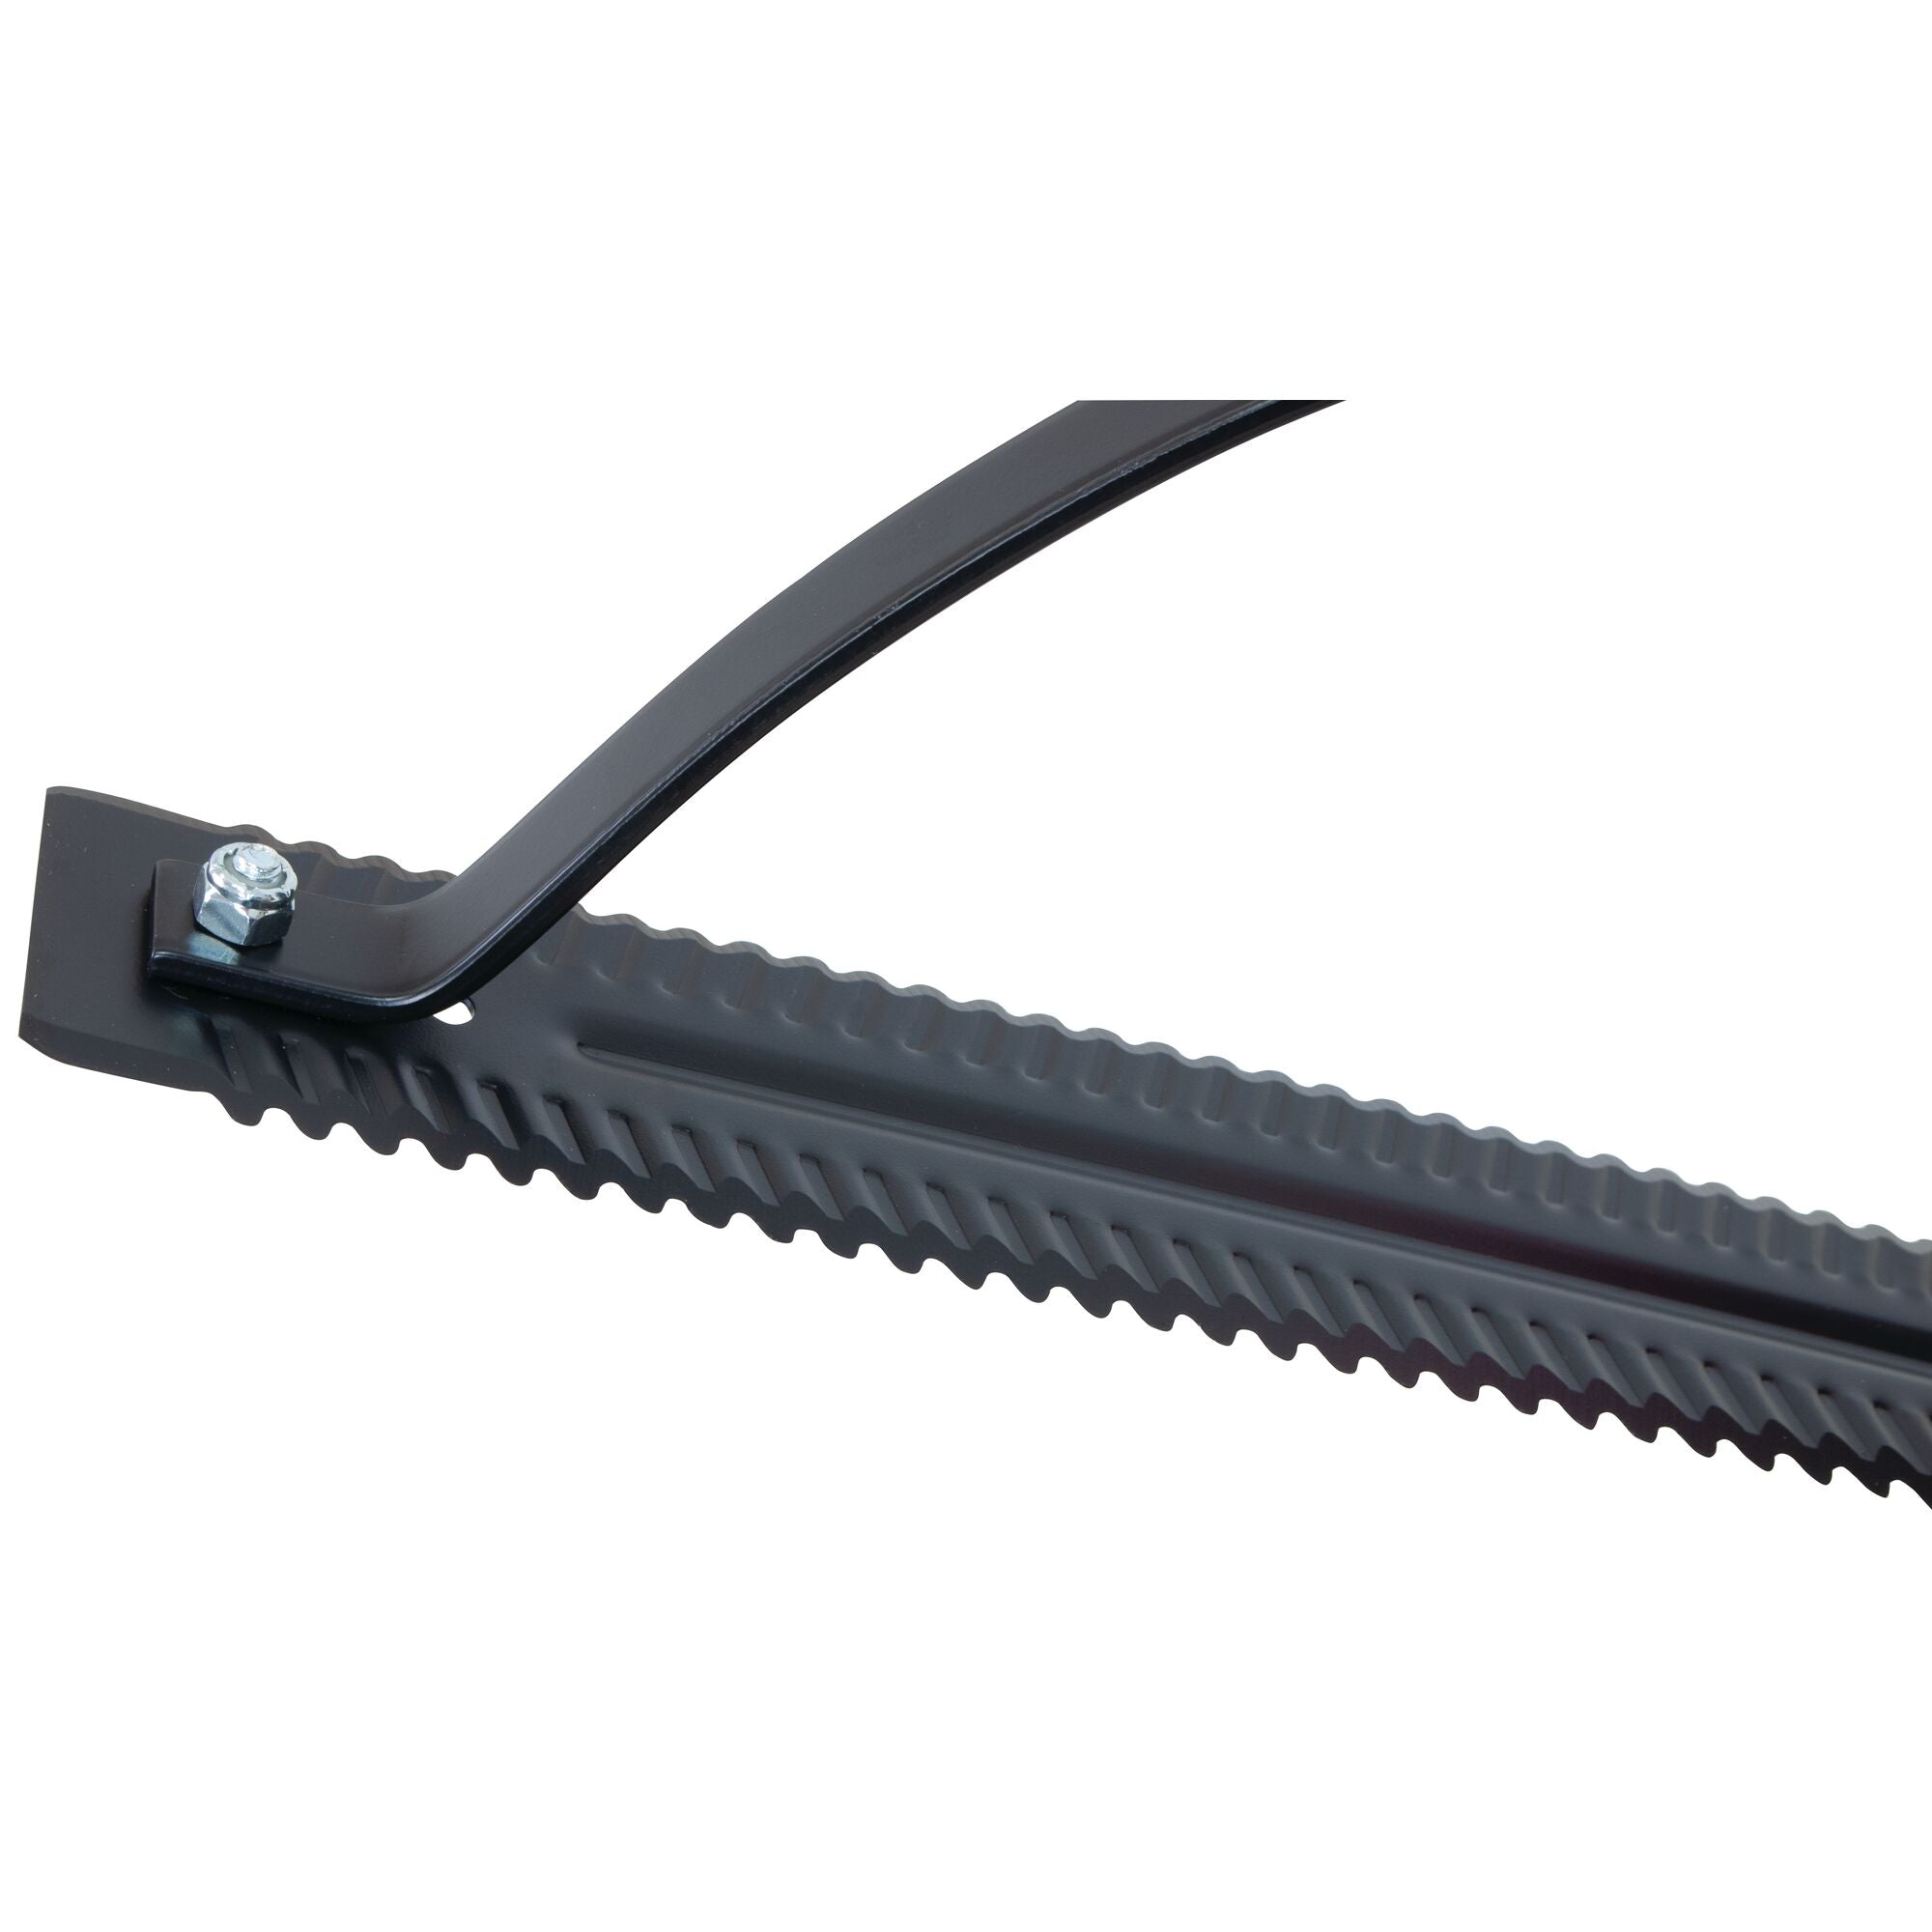 Serrated steel blade design feature in wood handle grass weed cutter.